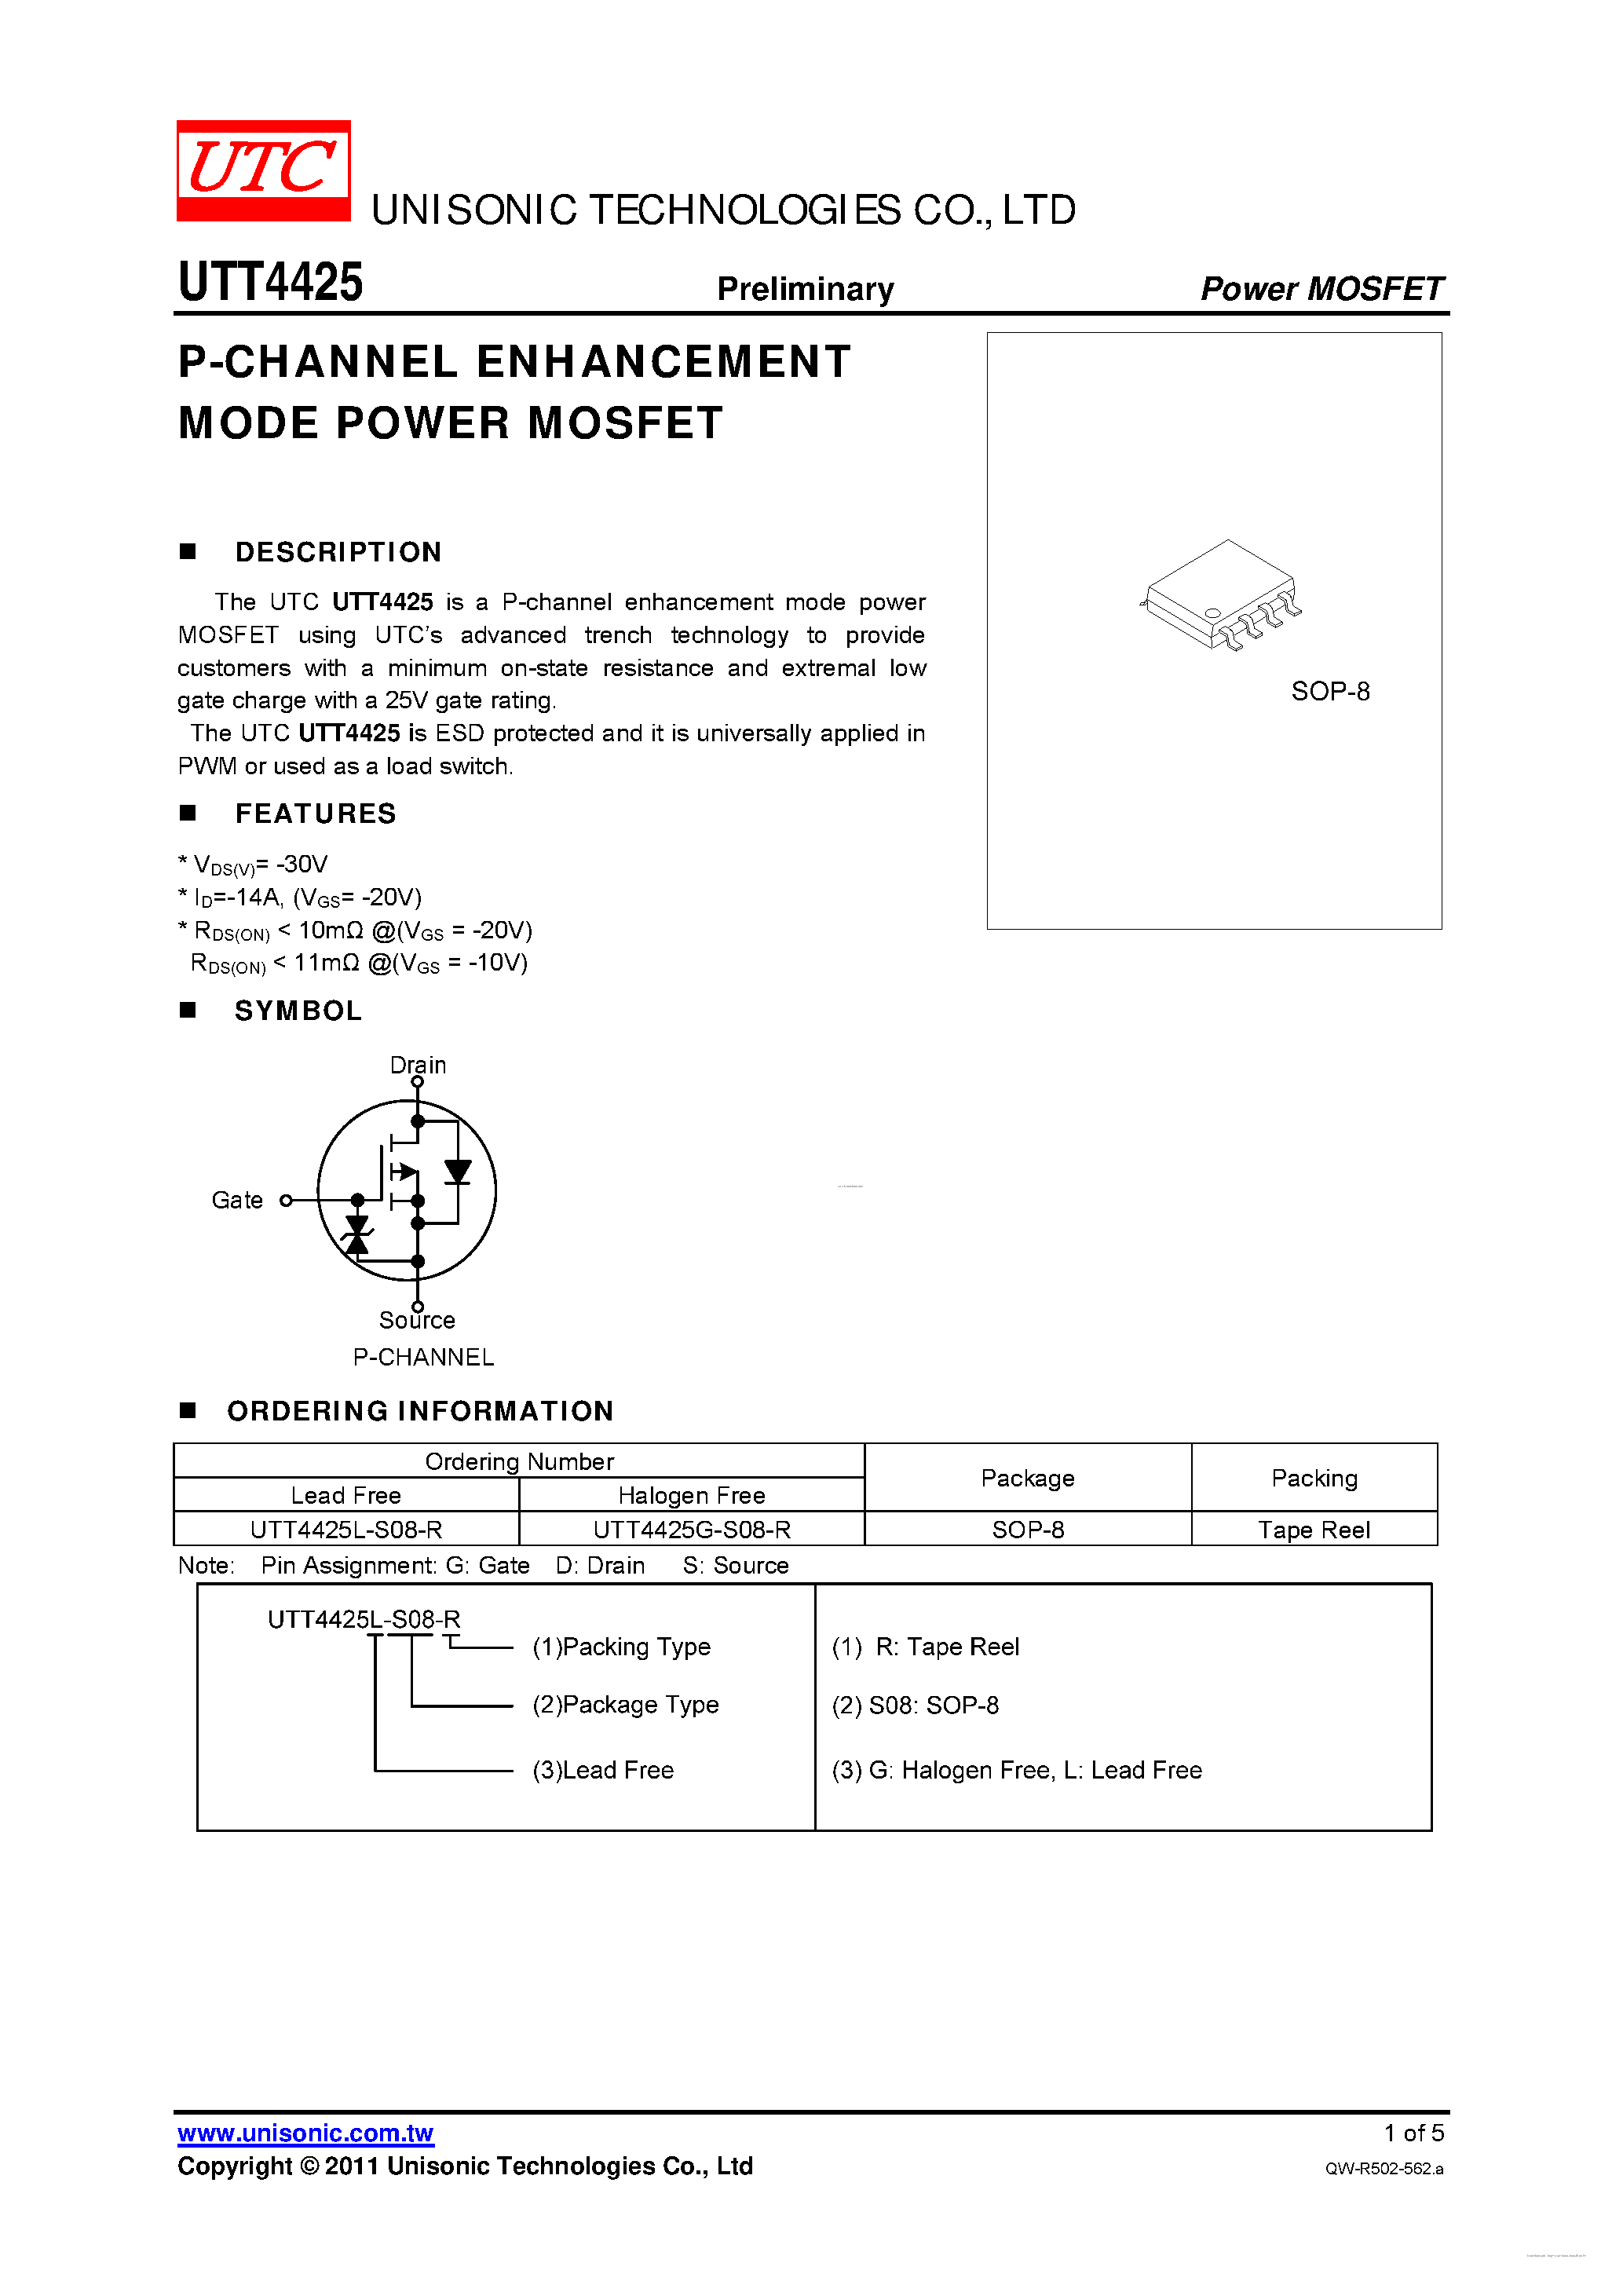 Datasheet UTT4425 - P-CHANNEL POWER MOSFET page 1